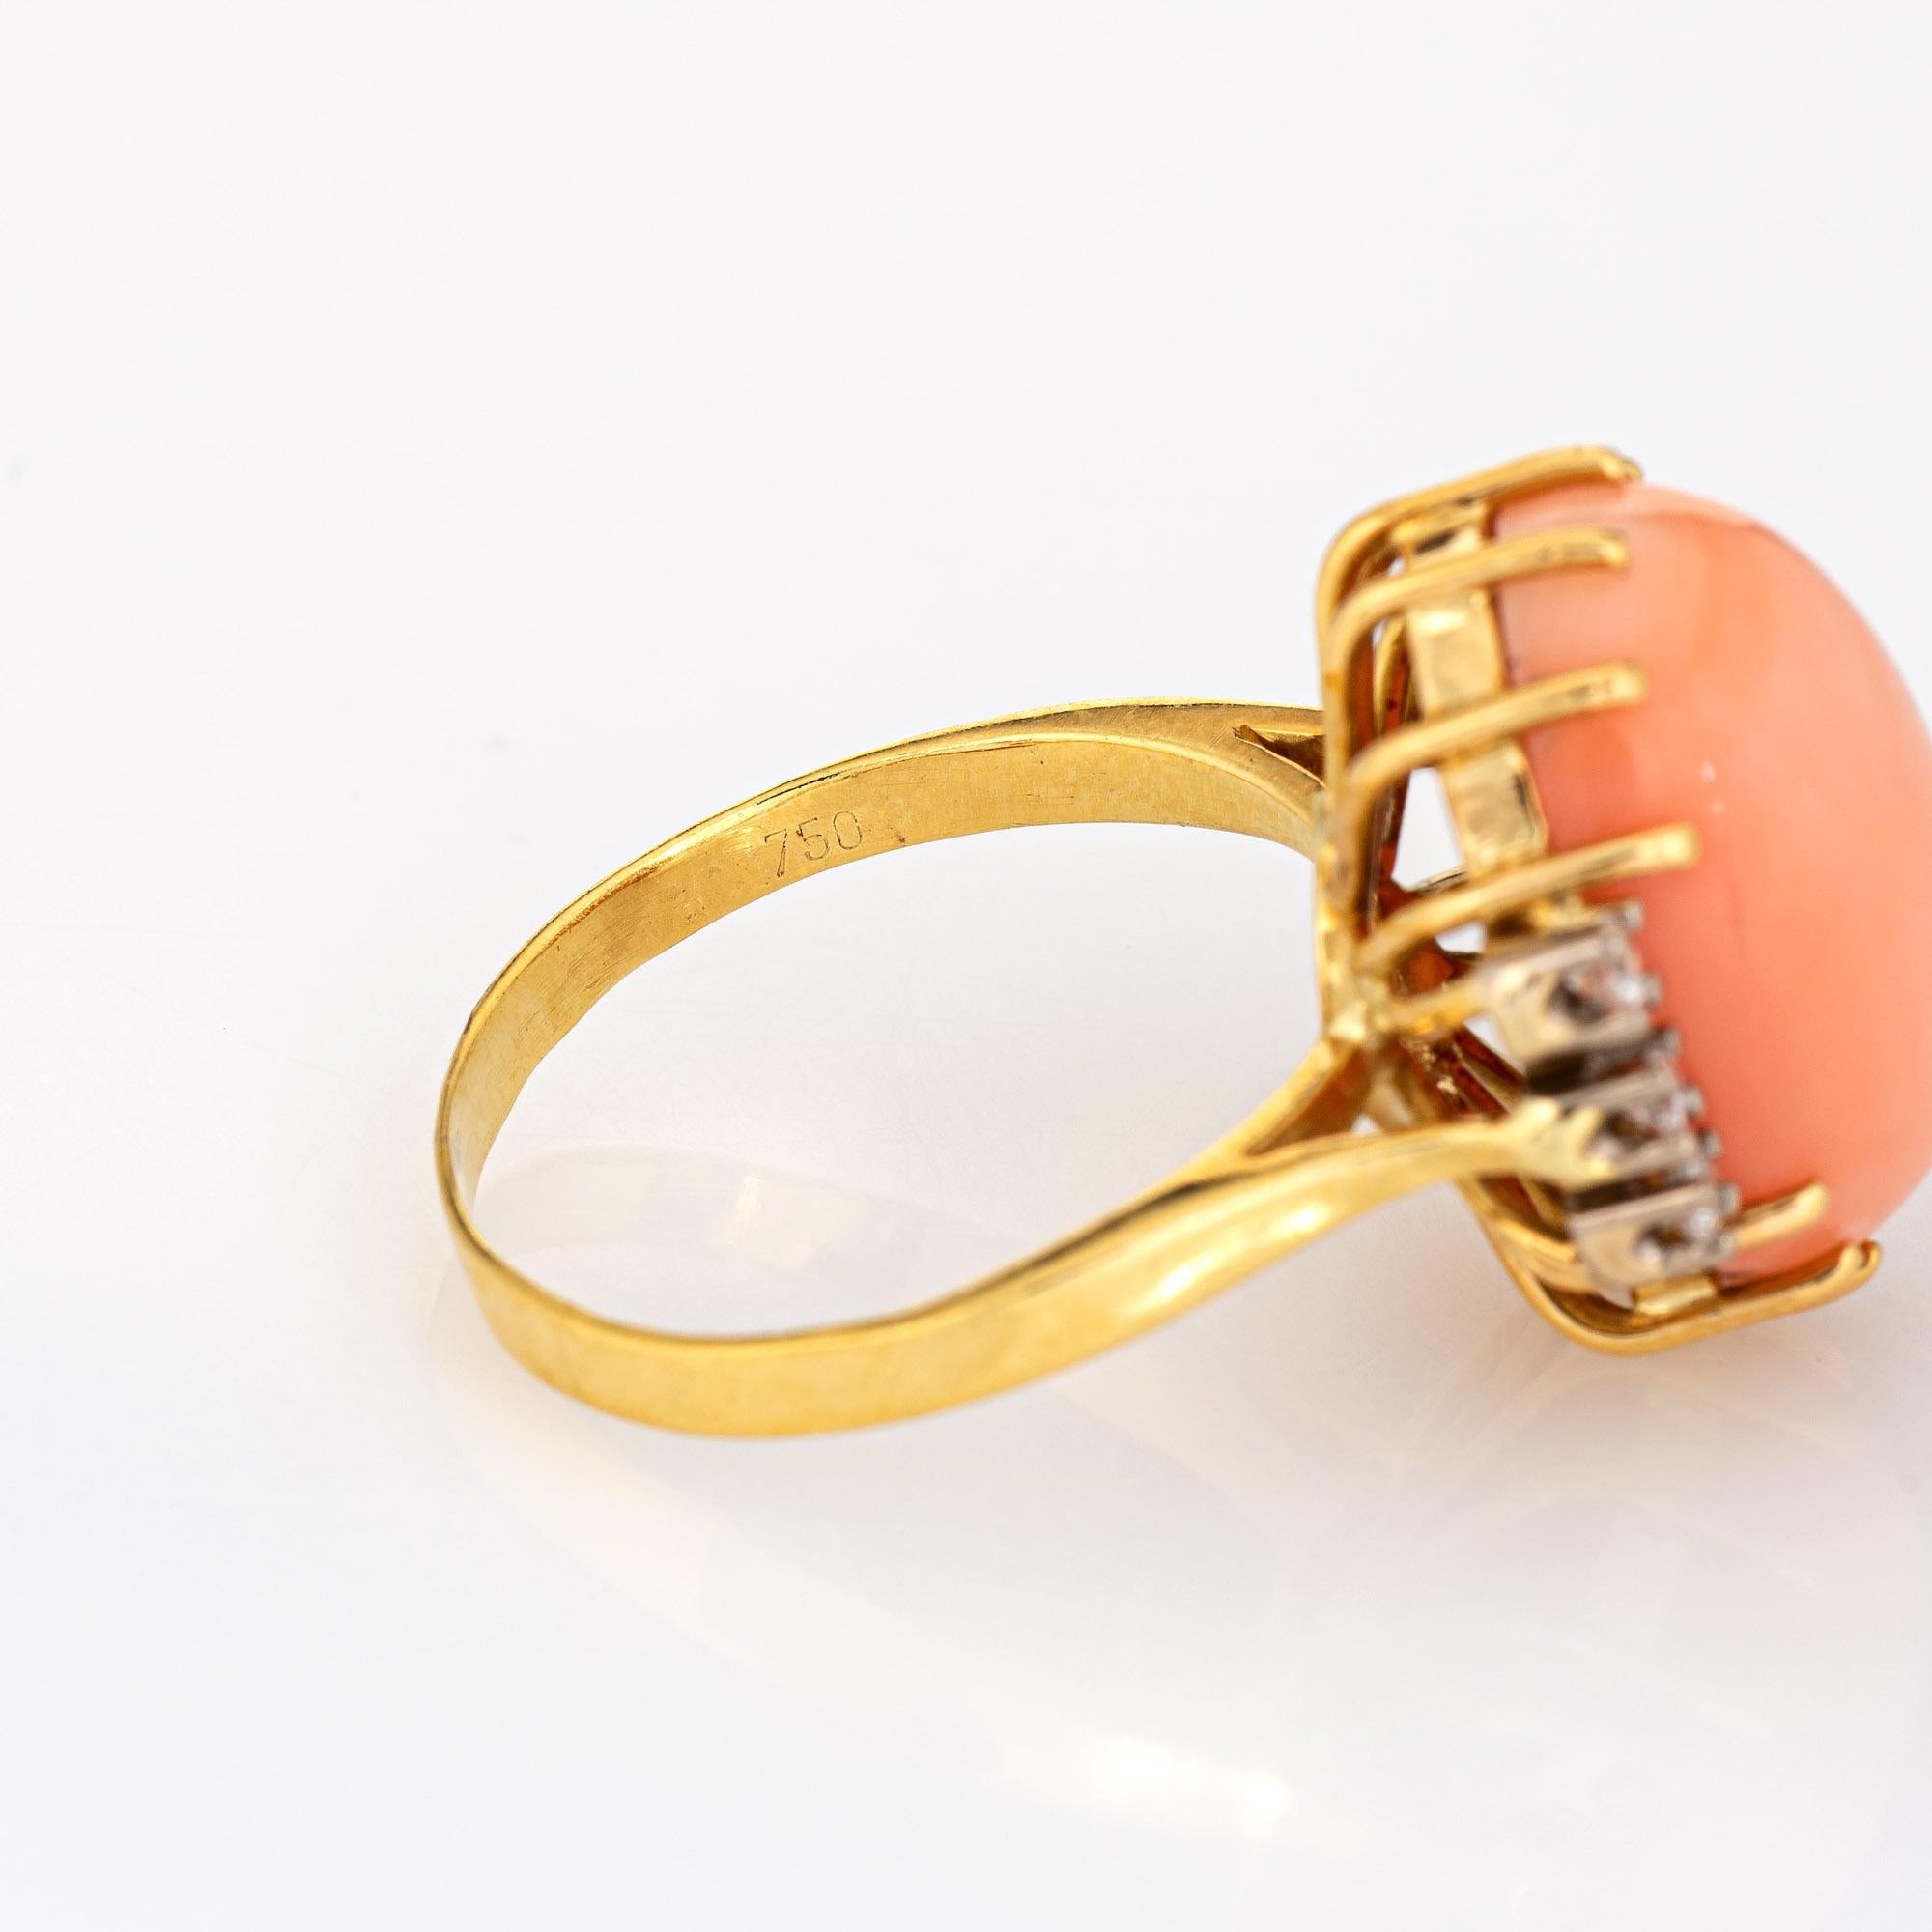 Light Peach Coral Diamond Ring Vintage 18k Yellow Gold Cocktail Jewelry 1